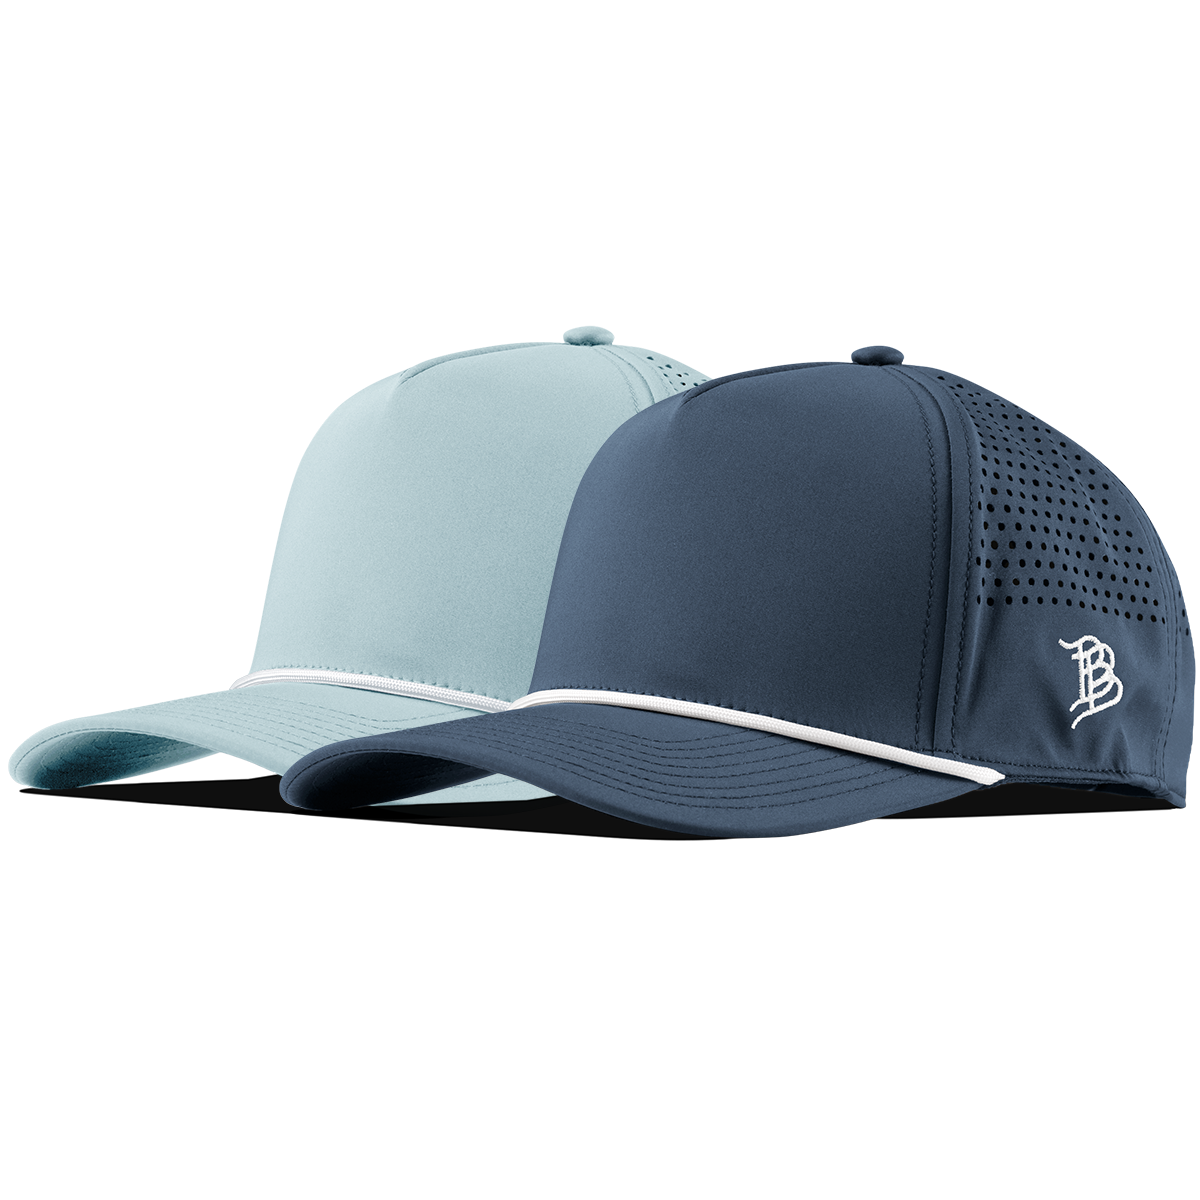 Bare Curved 5 Panel Rope 2-Pack Orion/White + Sky Blue/White